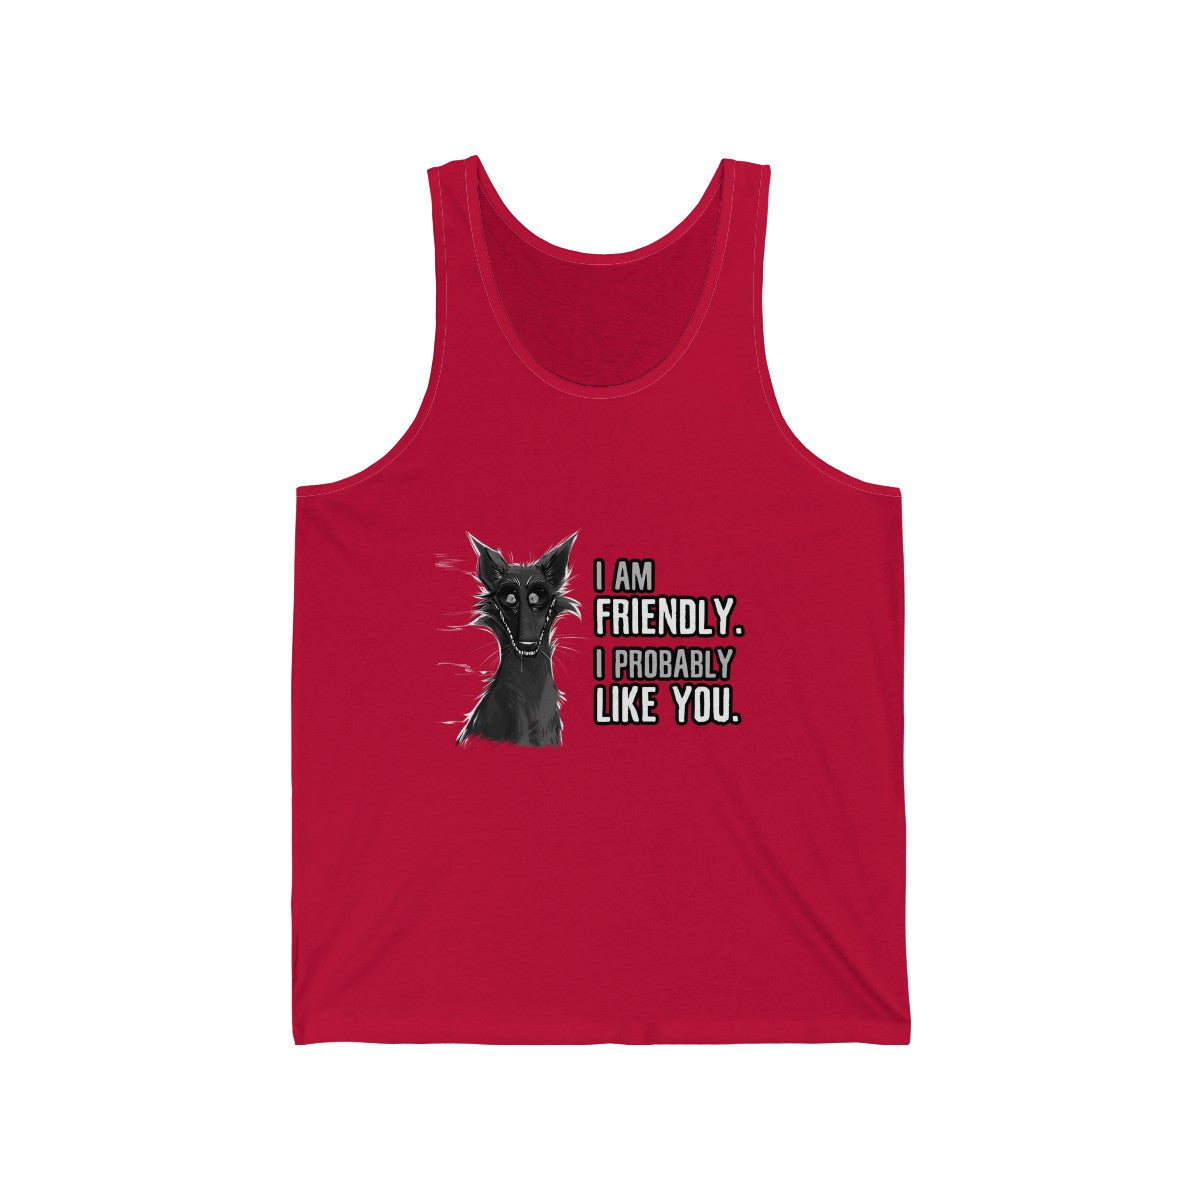 I probably DON'T hate you - Tank Top Tank Top Cyamallo Red XS 